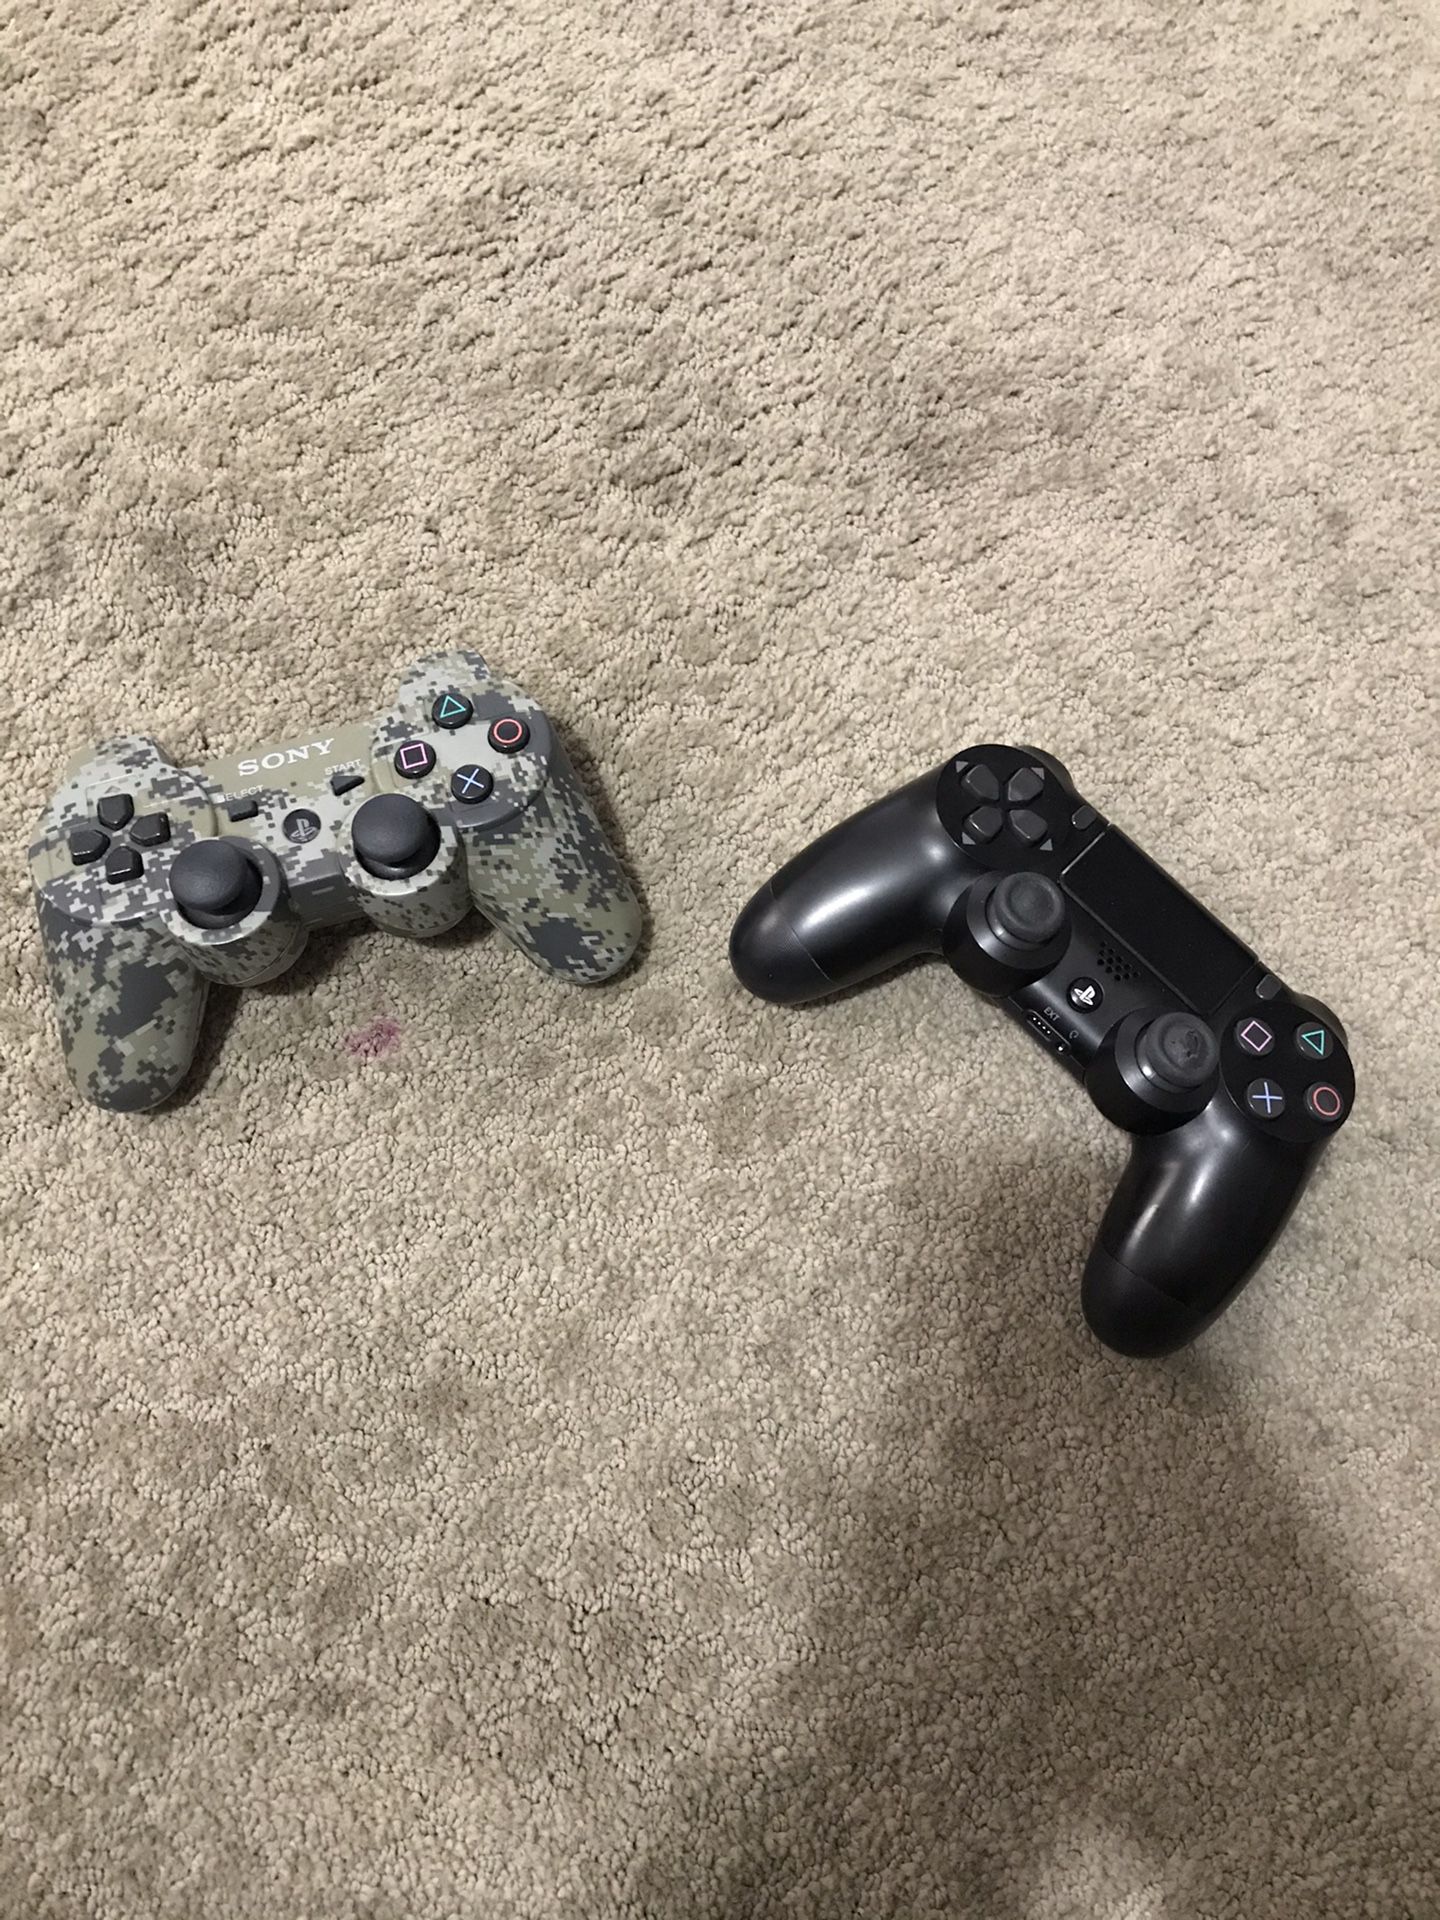 Ps4 and ps3 controllers.